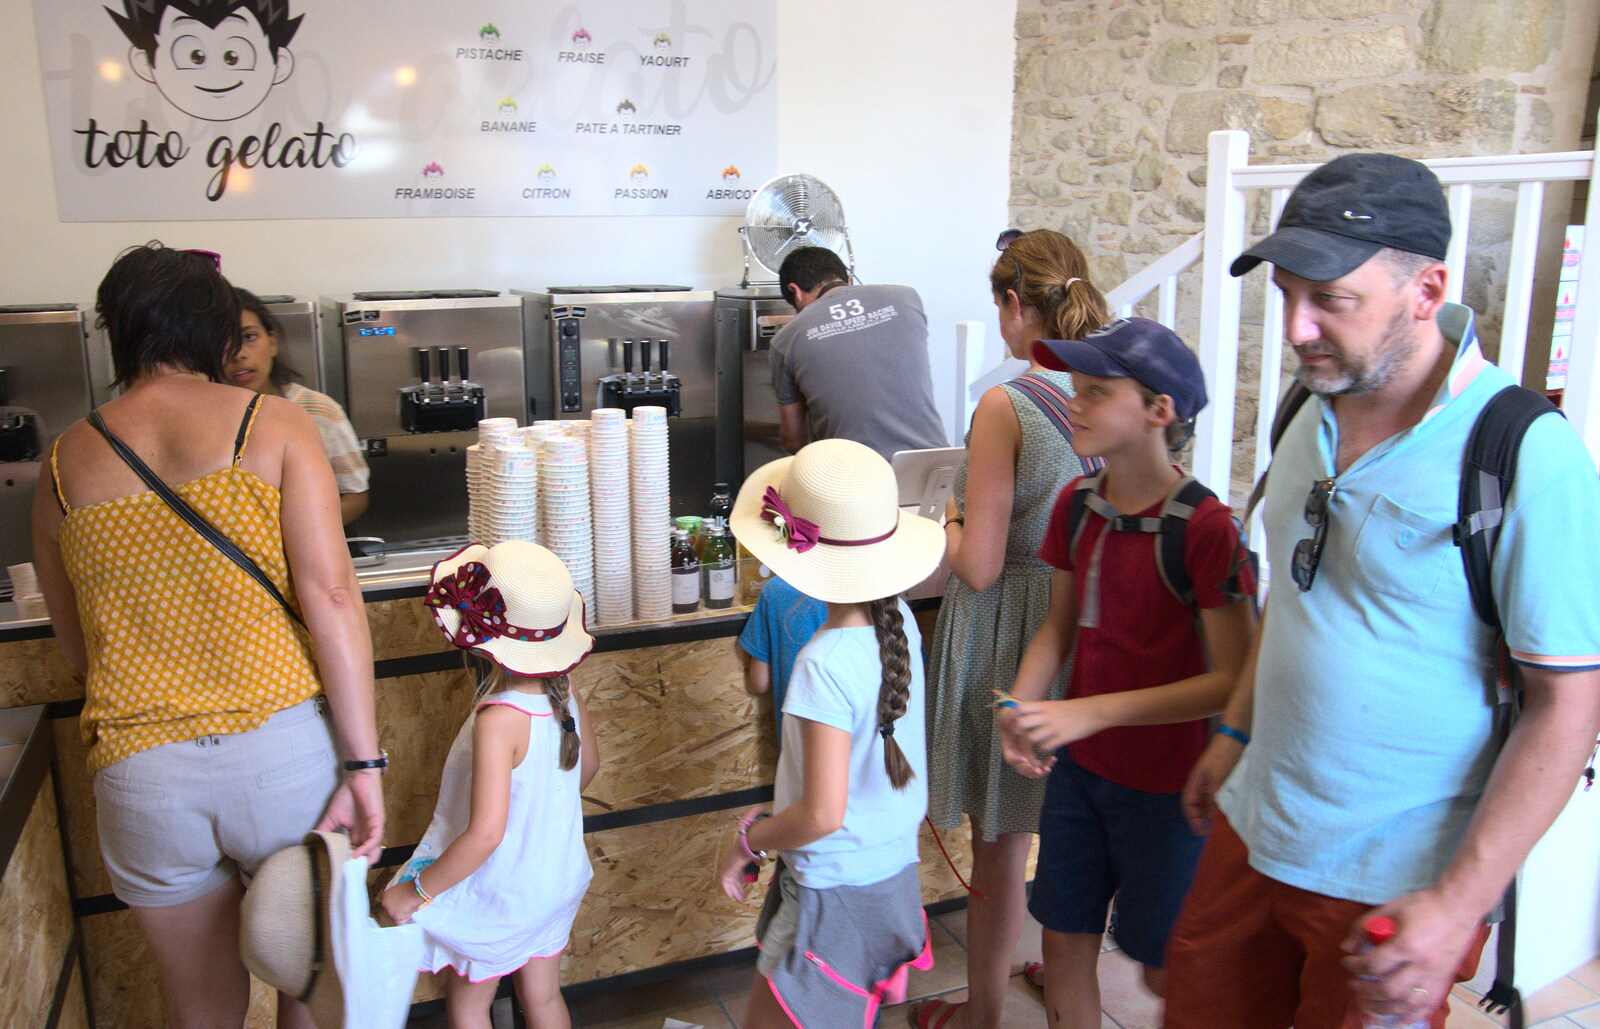 We're in Toto Gelato ice cream shop from The Château Comtal, Lastours and the Journey Home, Carcassonne, Aude, France - 14th August 2018